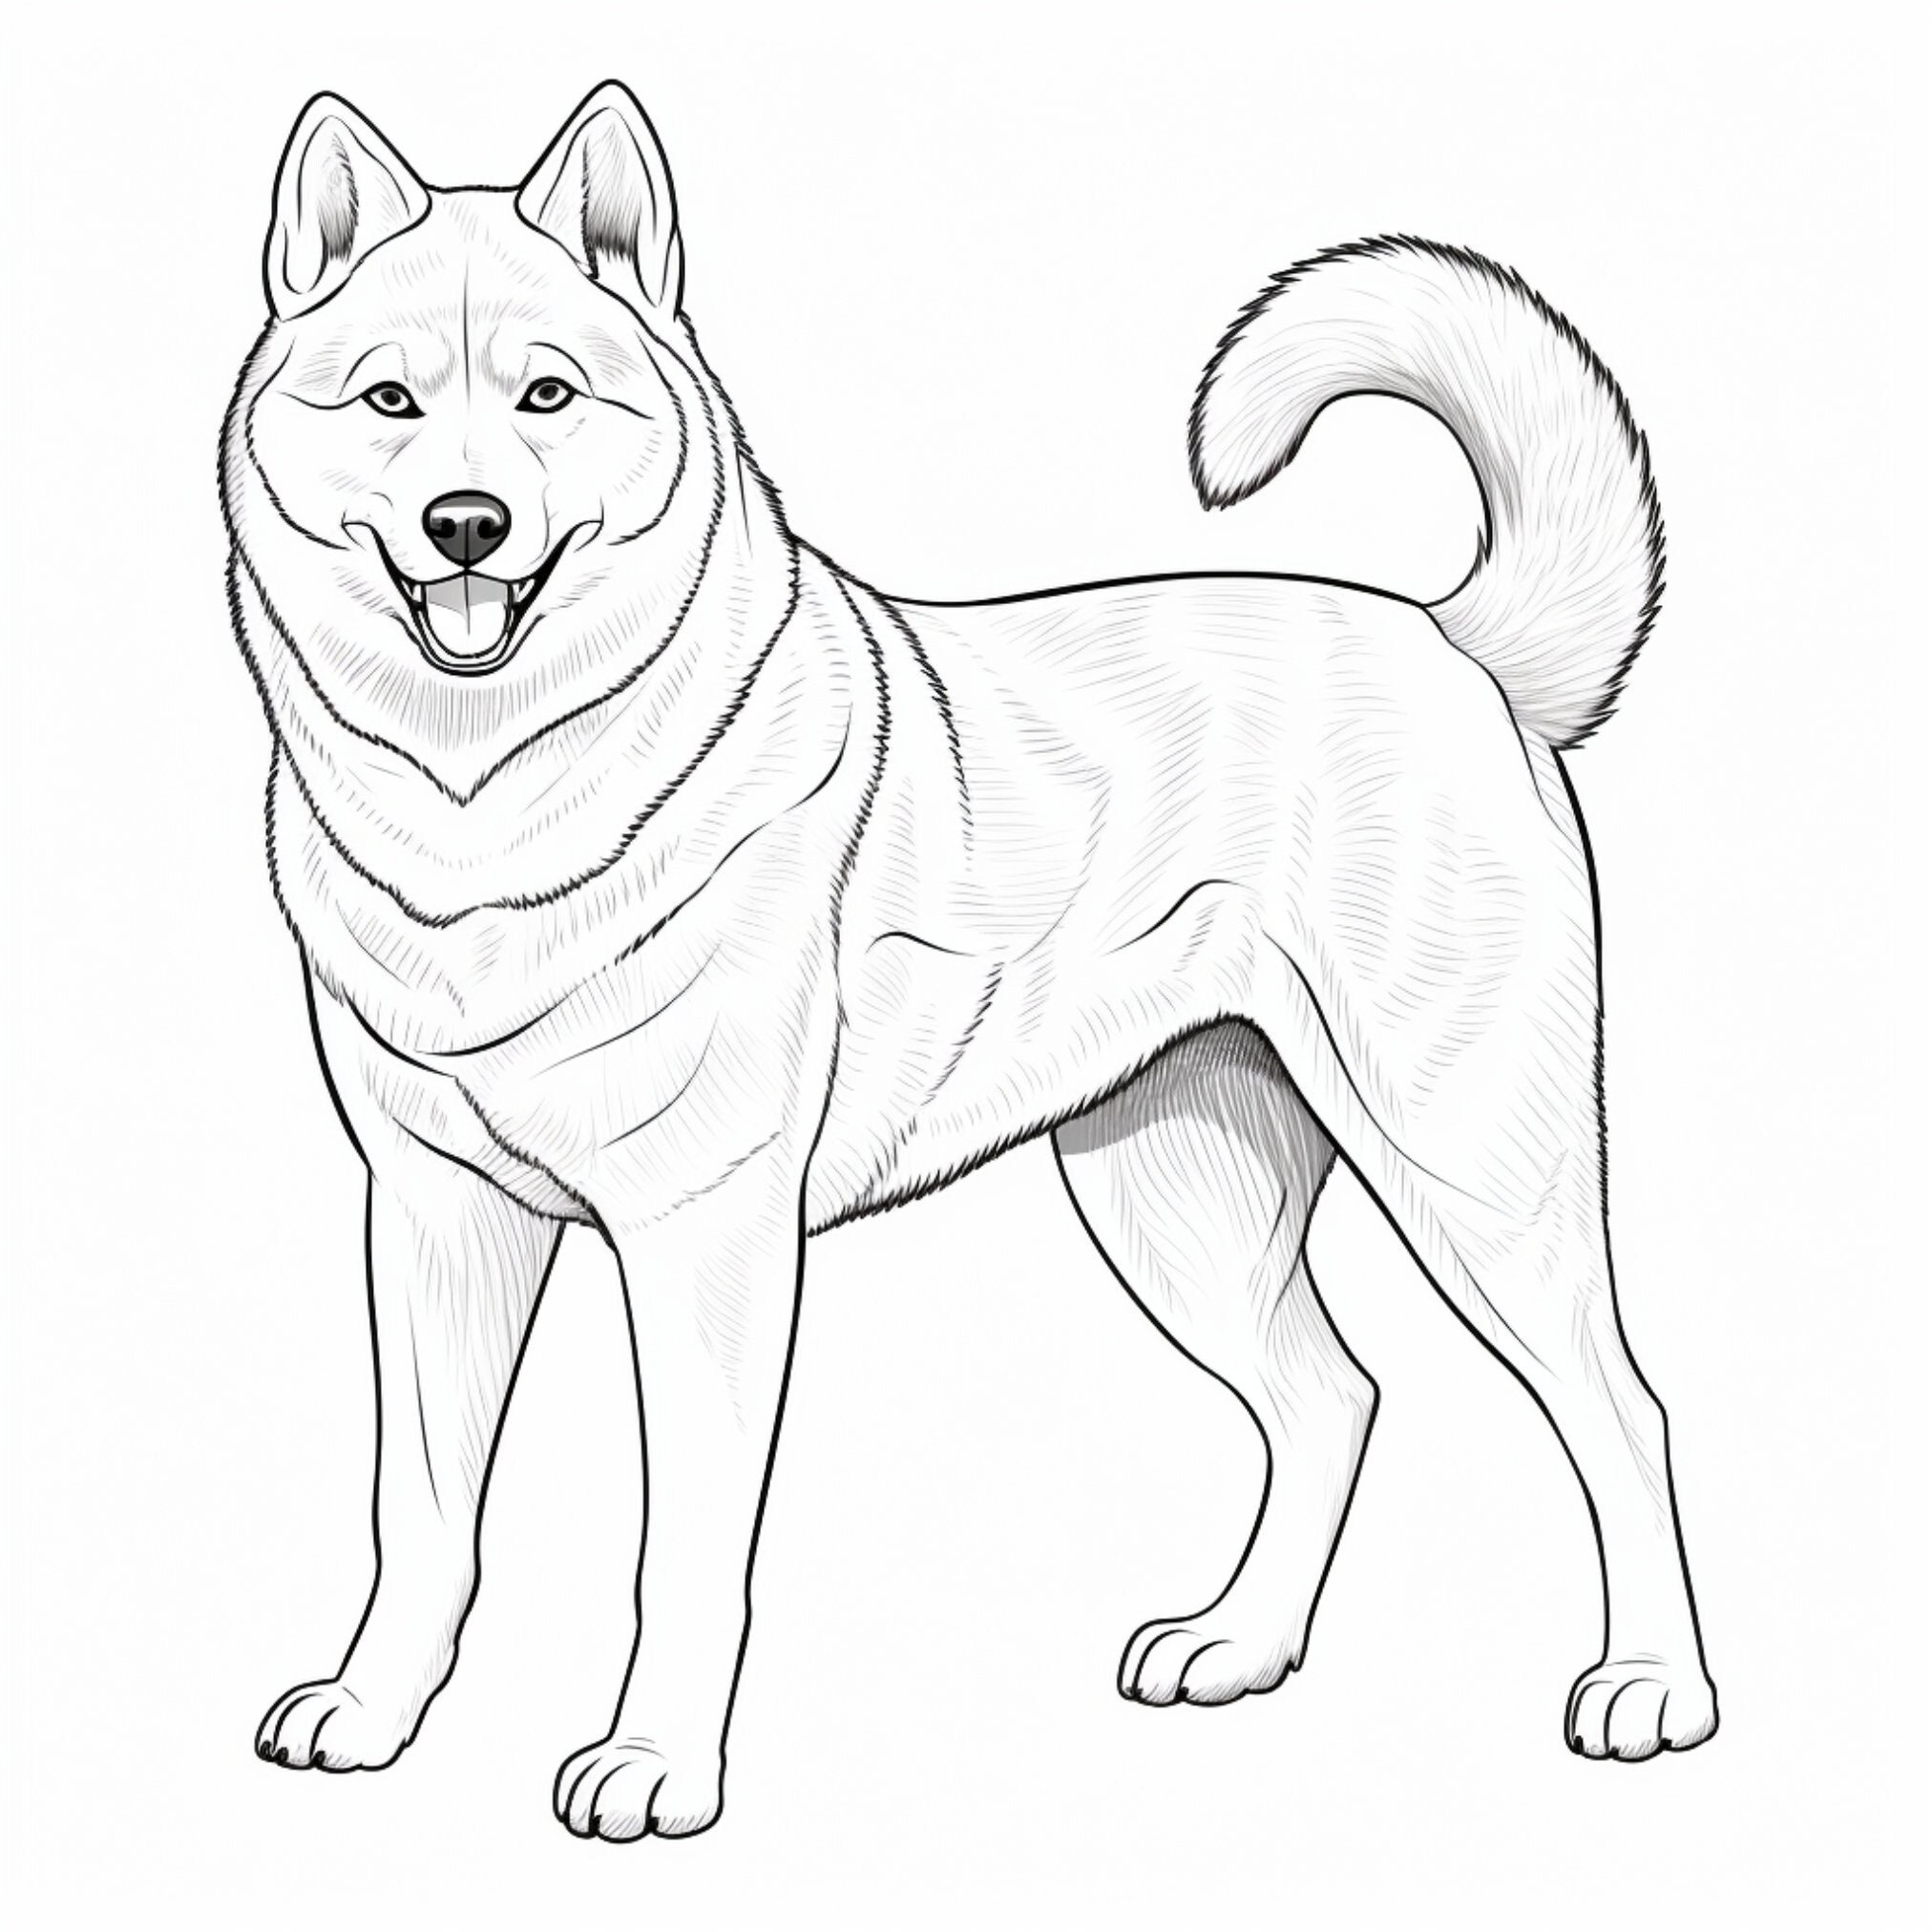 Shiba Inu Coloring Book: A Cute Adult Coloring Books for Shiba Inu Owner,  Best Gift for Shiba Inu Lovers